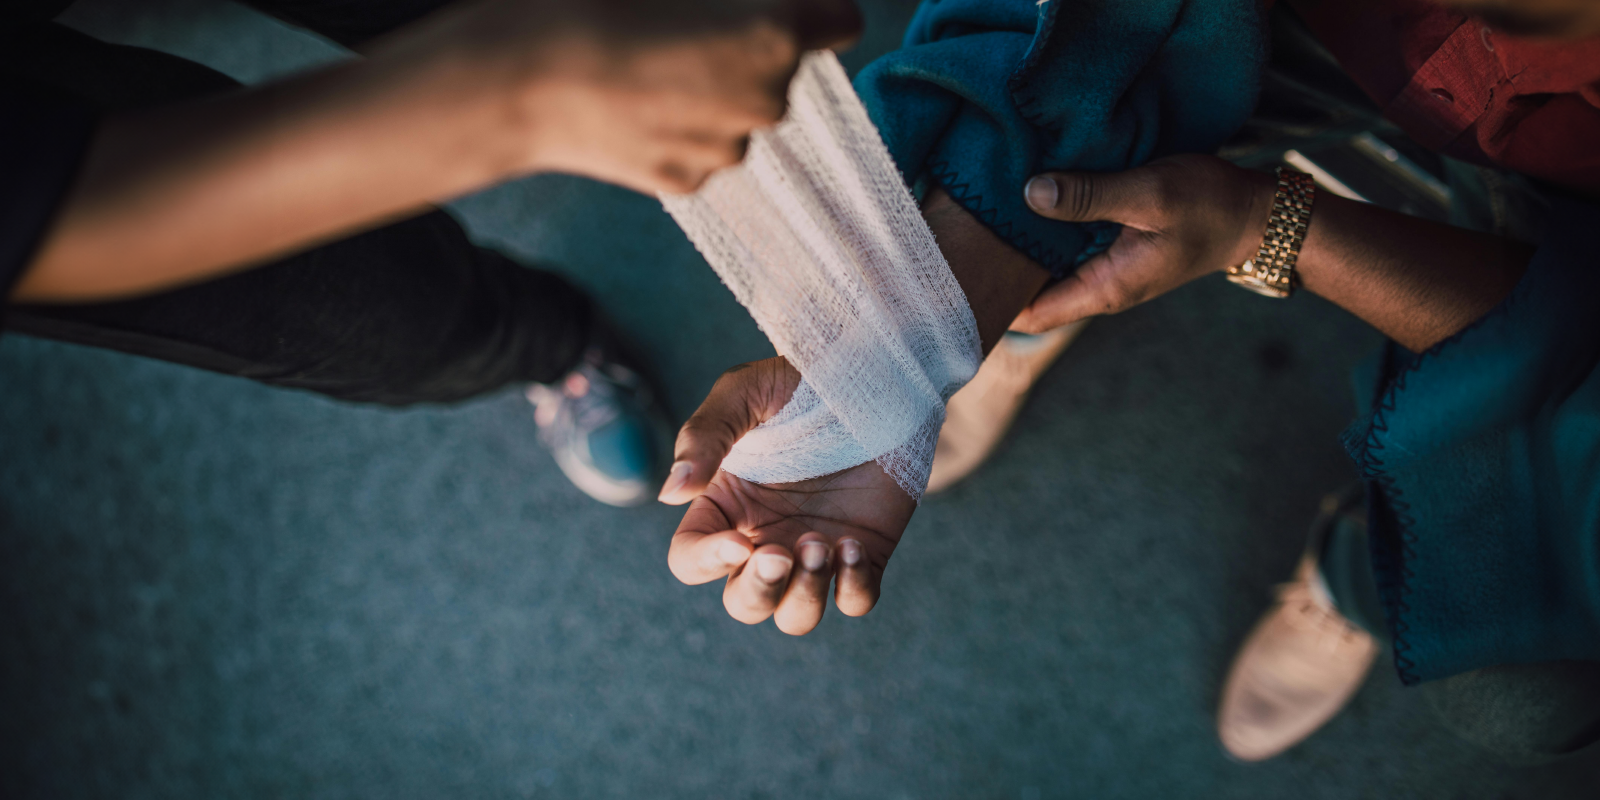 Burn Injuries: Causes, Treatment, and Legal Options